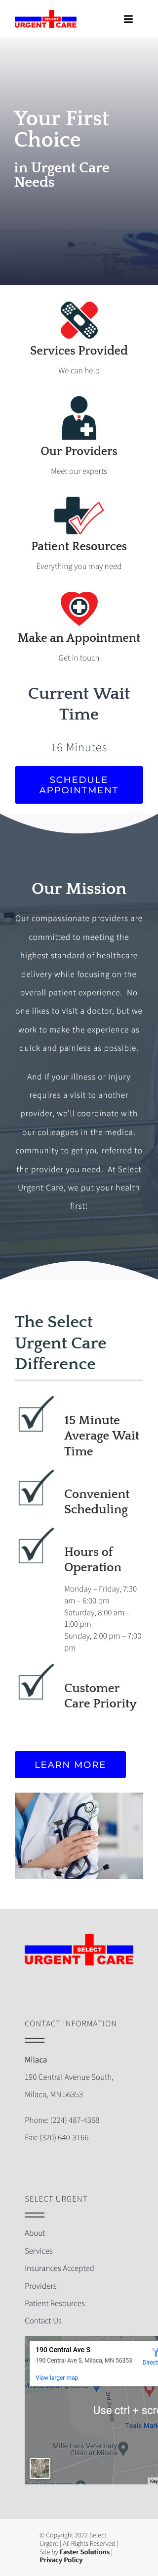 Select Urgent Care - Mobile